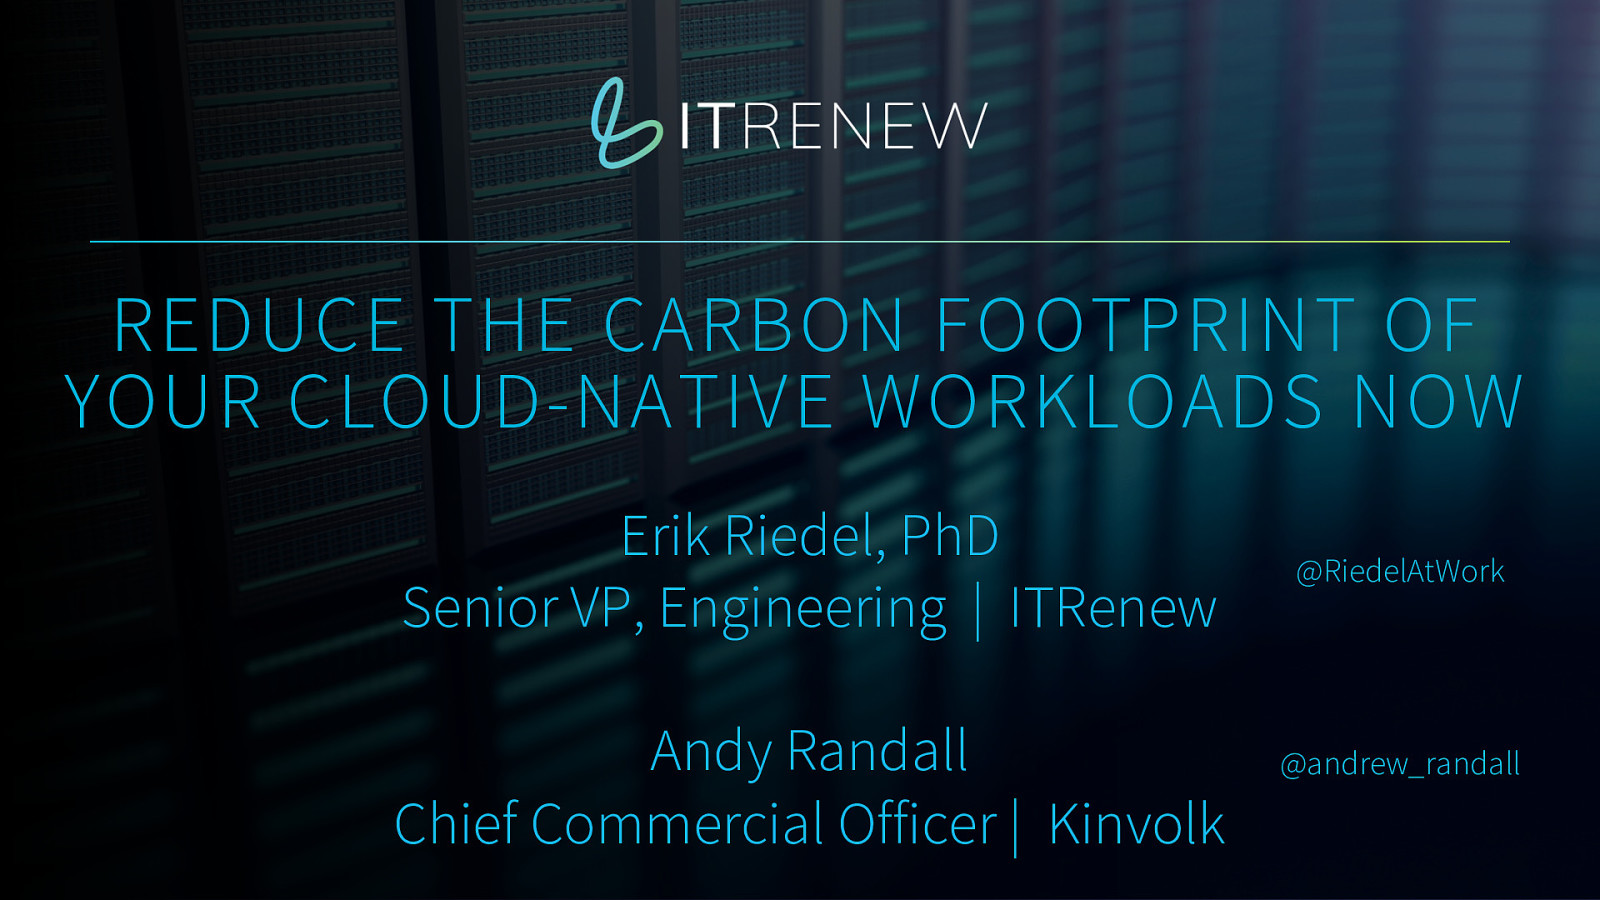 Reduce The Carbon Footprint of Your Cloud-Native Workloads Now